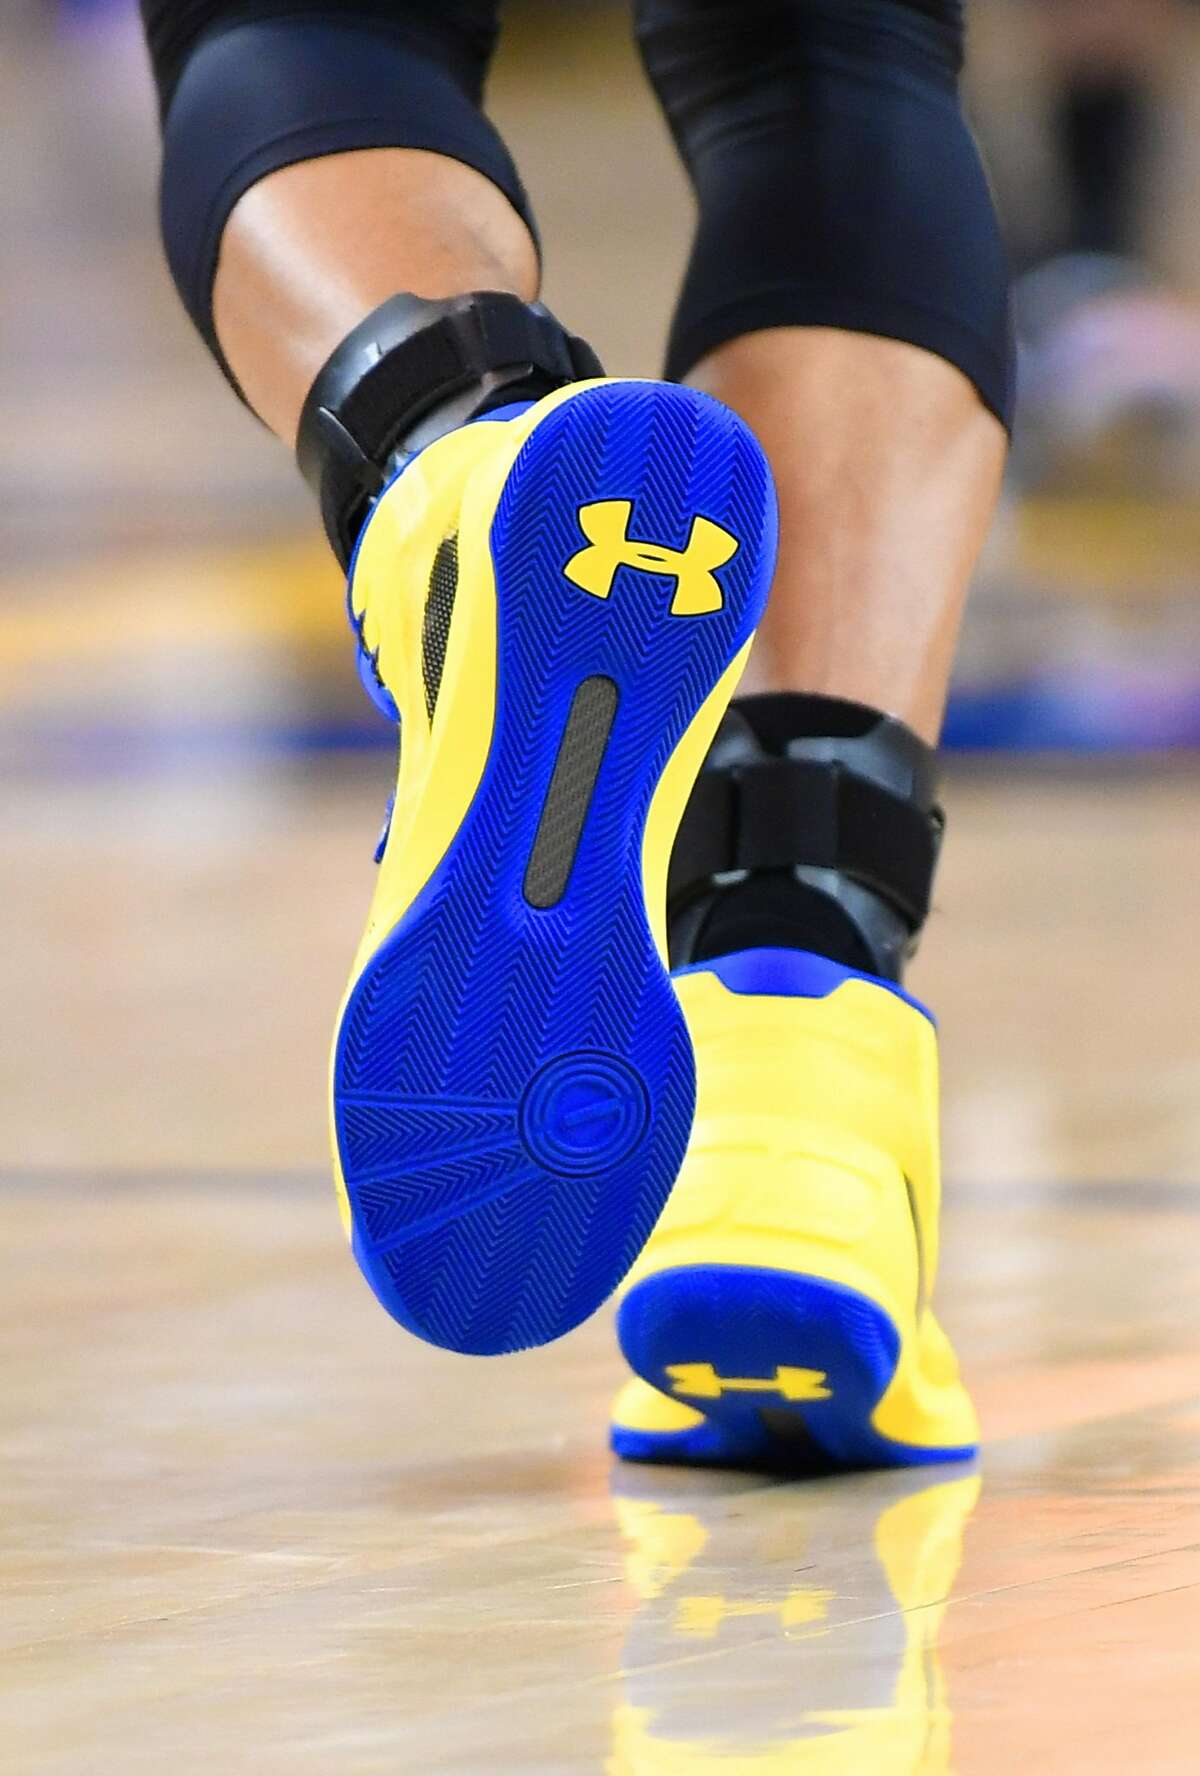 OAKLAND, CA - DECEMBER 03: A detailed view of the Under Armour Curry 3 basket ball shoes worn by Stephen Curry #30 of the Golden State Warriors against the Phoenix Suns during an NBA basketball game at ORACLE Arena on December 3, 2016 in Oakland, California. NOTE TO USER: User expressly acknowledges and agrees that, by downloading and or using this photograph, User is consenting to the terms and conditions of the Getty Images License Agreement. (Photo by Thearon W. Henderson/Getty Images)